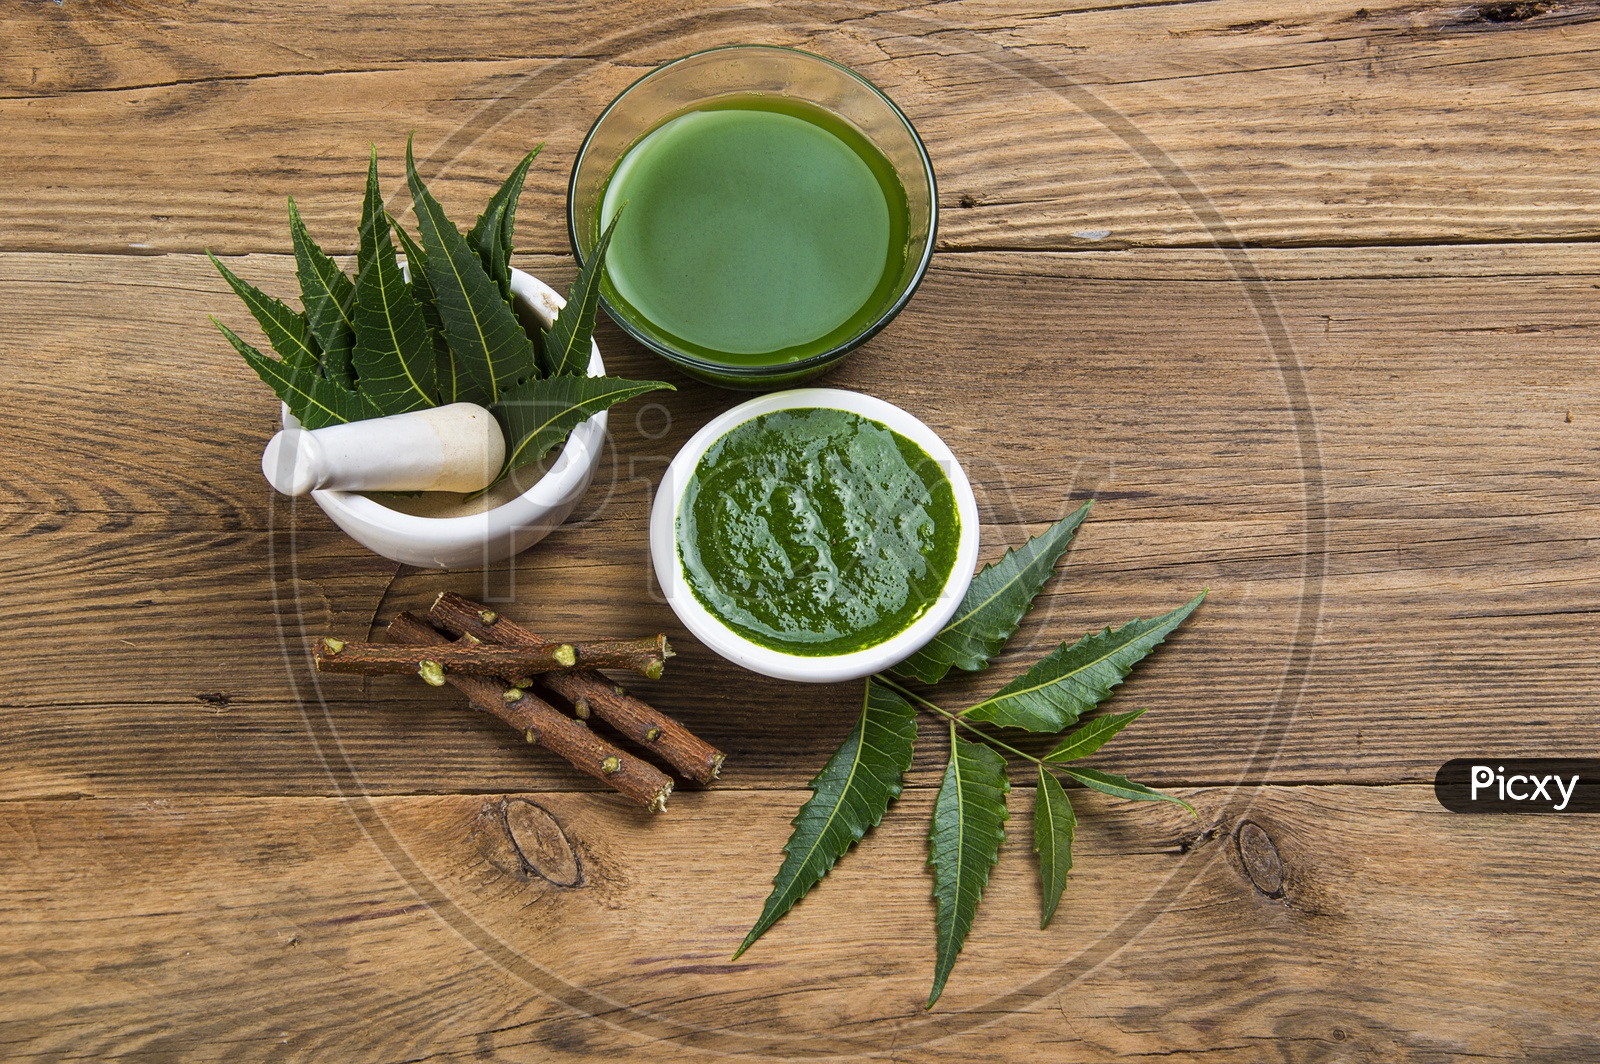 Medicinal Neem leaves in mortar and pestle with neem paste, juice and twigs on wooden background